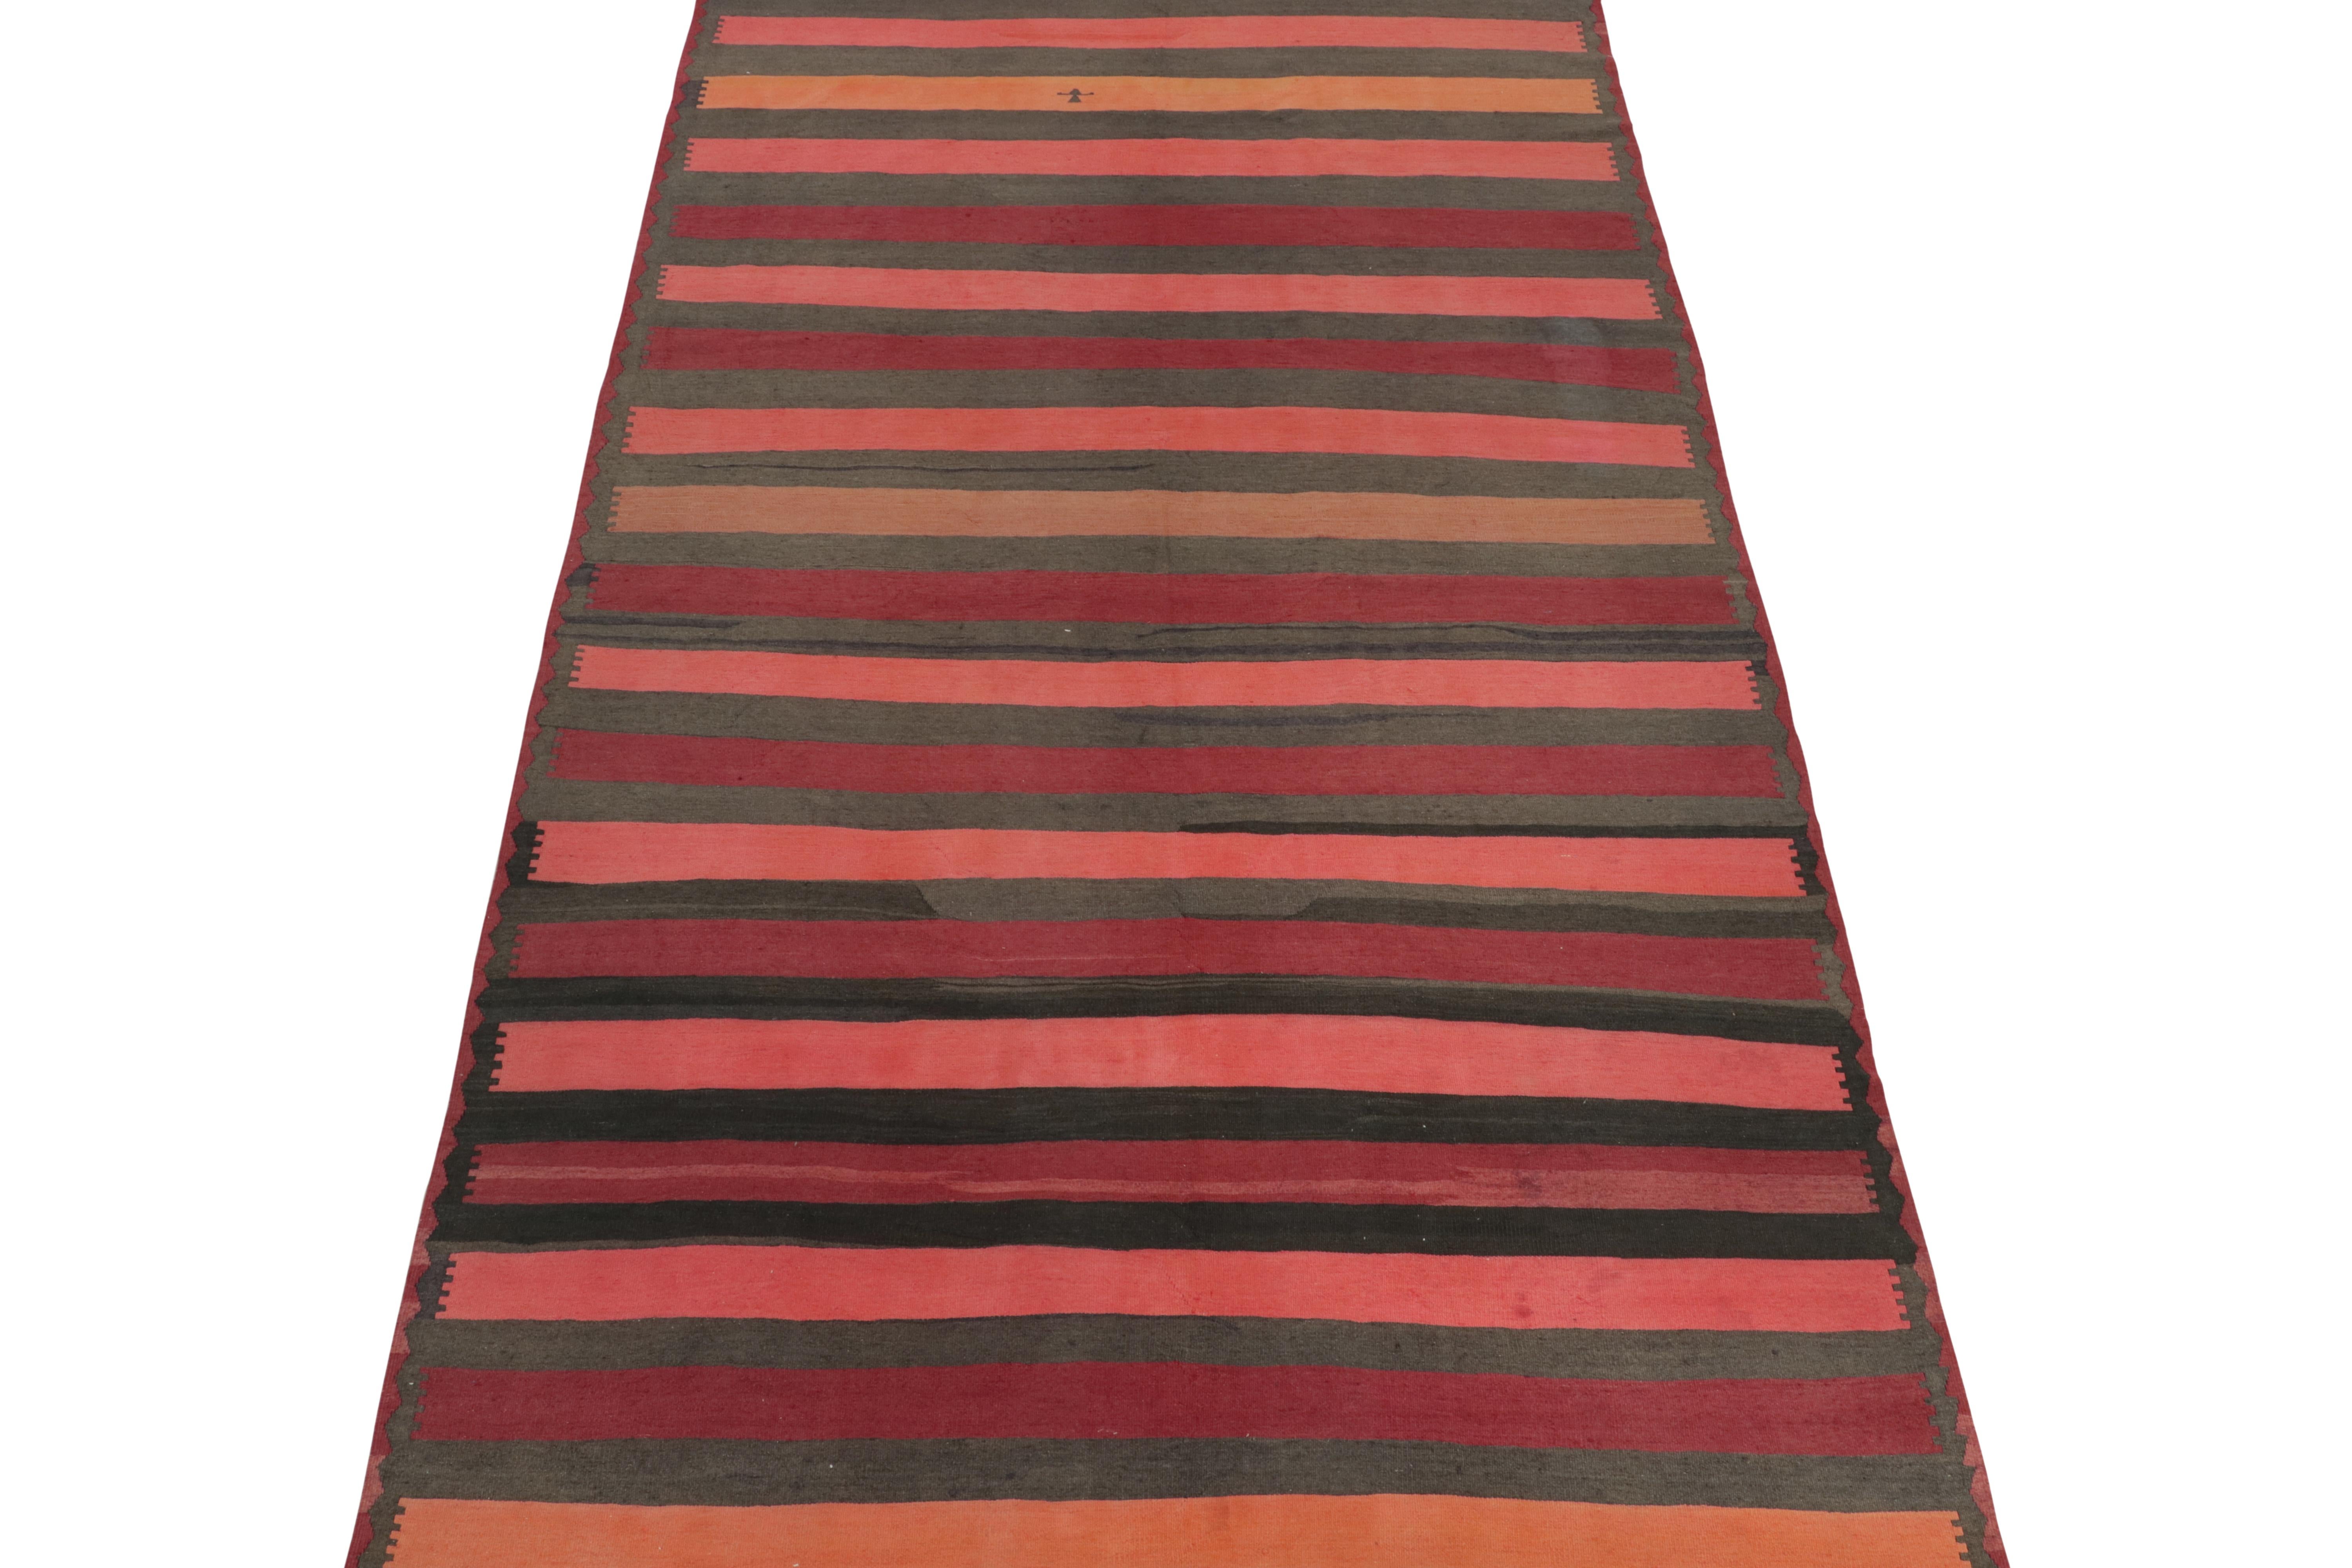 This vintage 7x12 Persian Kilim is a unique tribal rug for its period that hails from the Northwestern in Azerbaijan. Handwoven in wool, it originates circa 1950-1960.

Further on the Design:

The field hosts a series of horizontal stripes